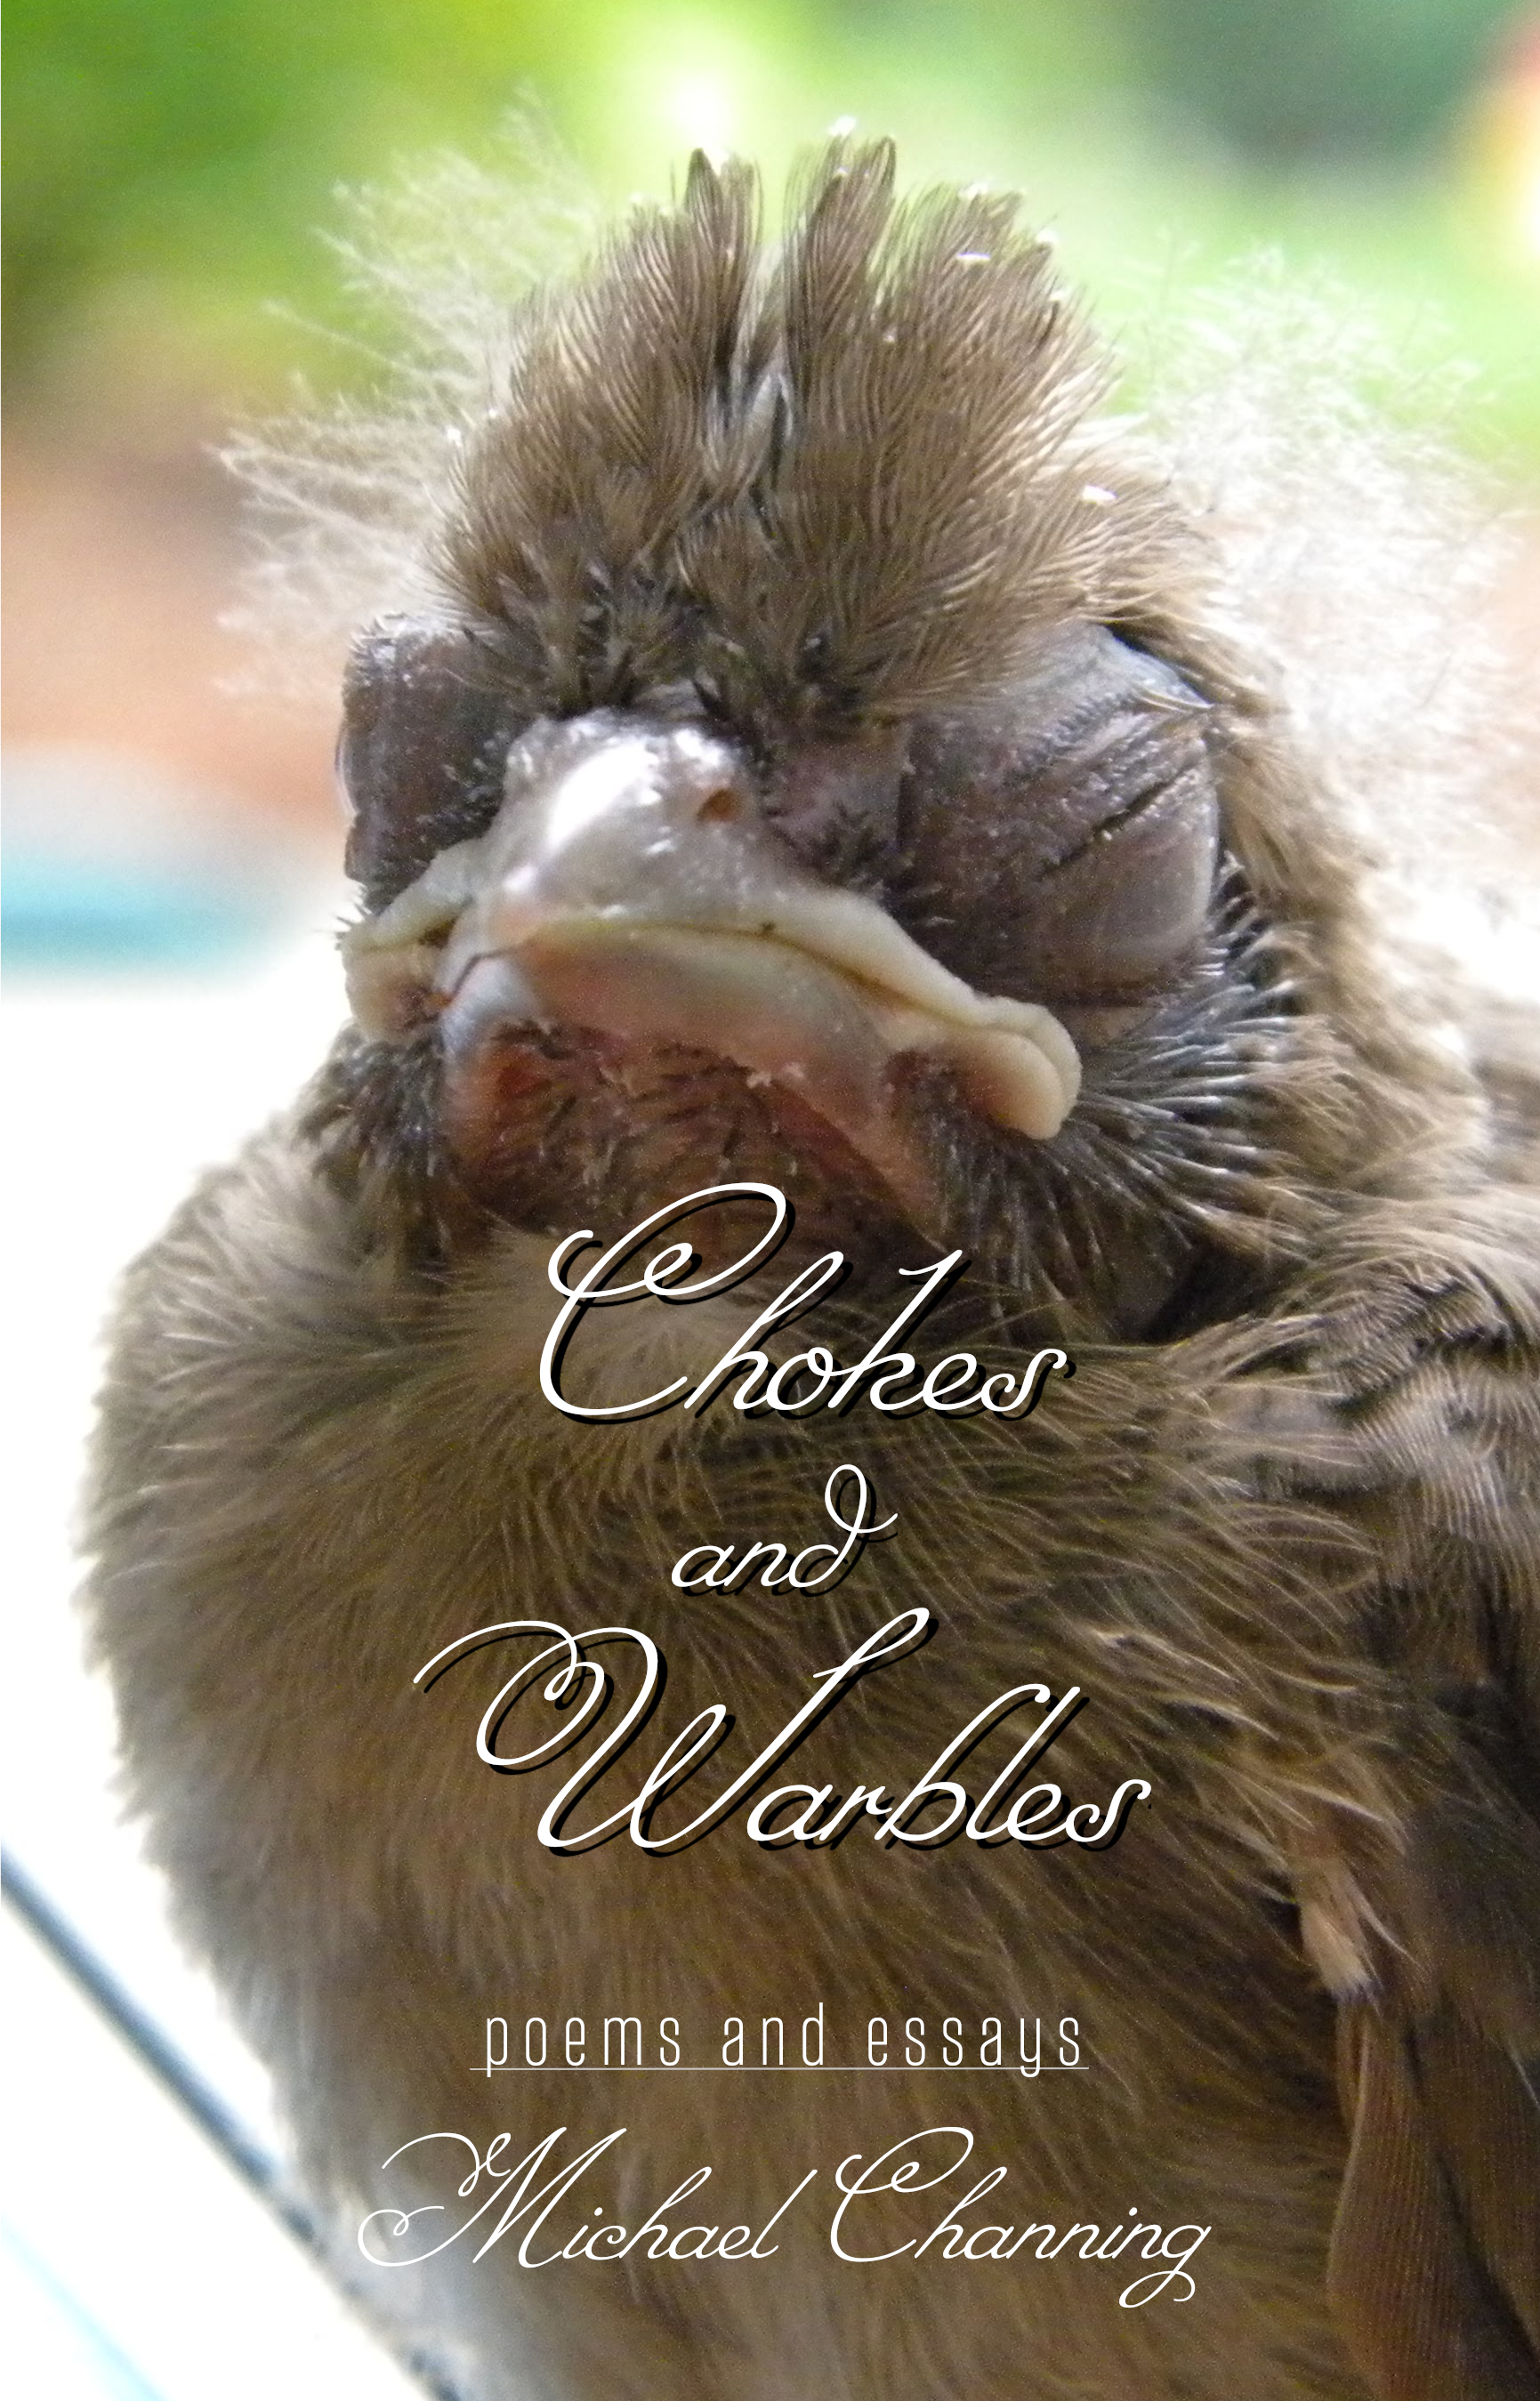 Chokes and Warbles, a book of essays and poems by Michael Channing